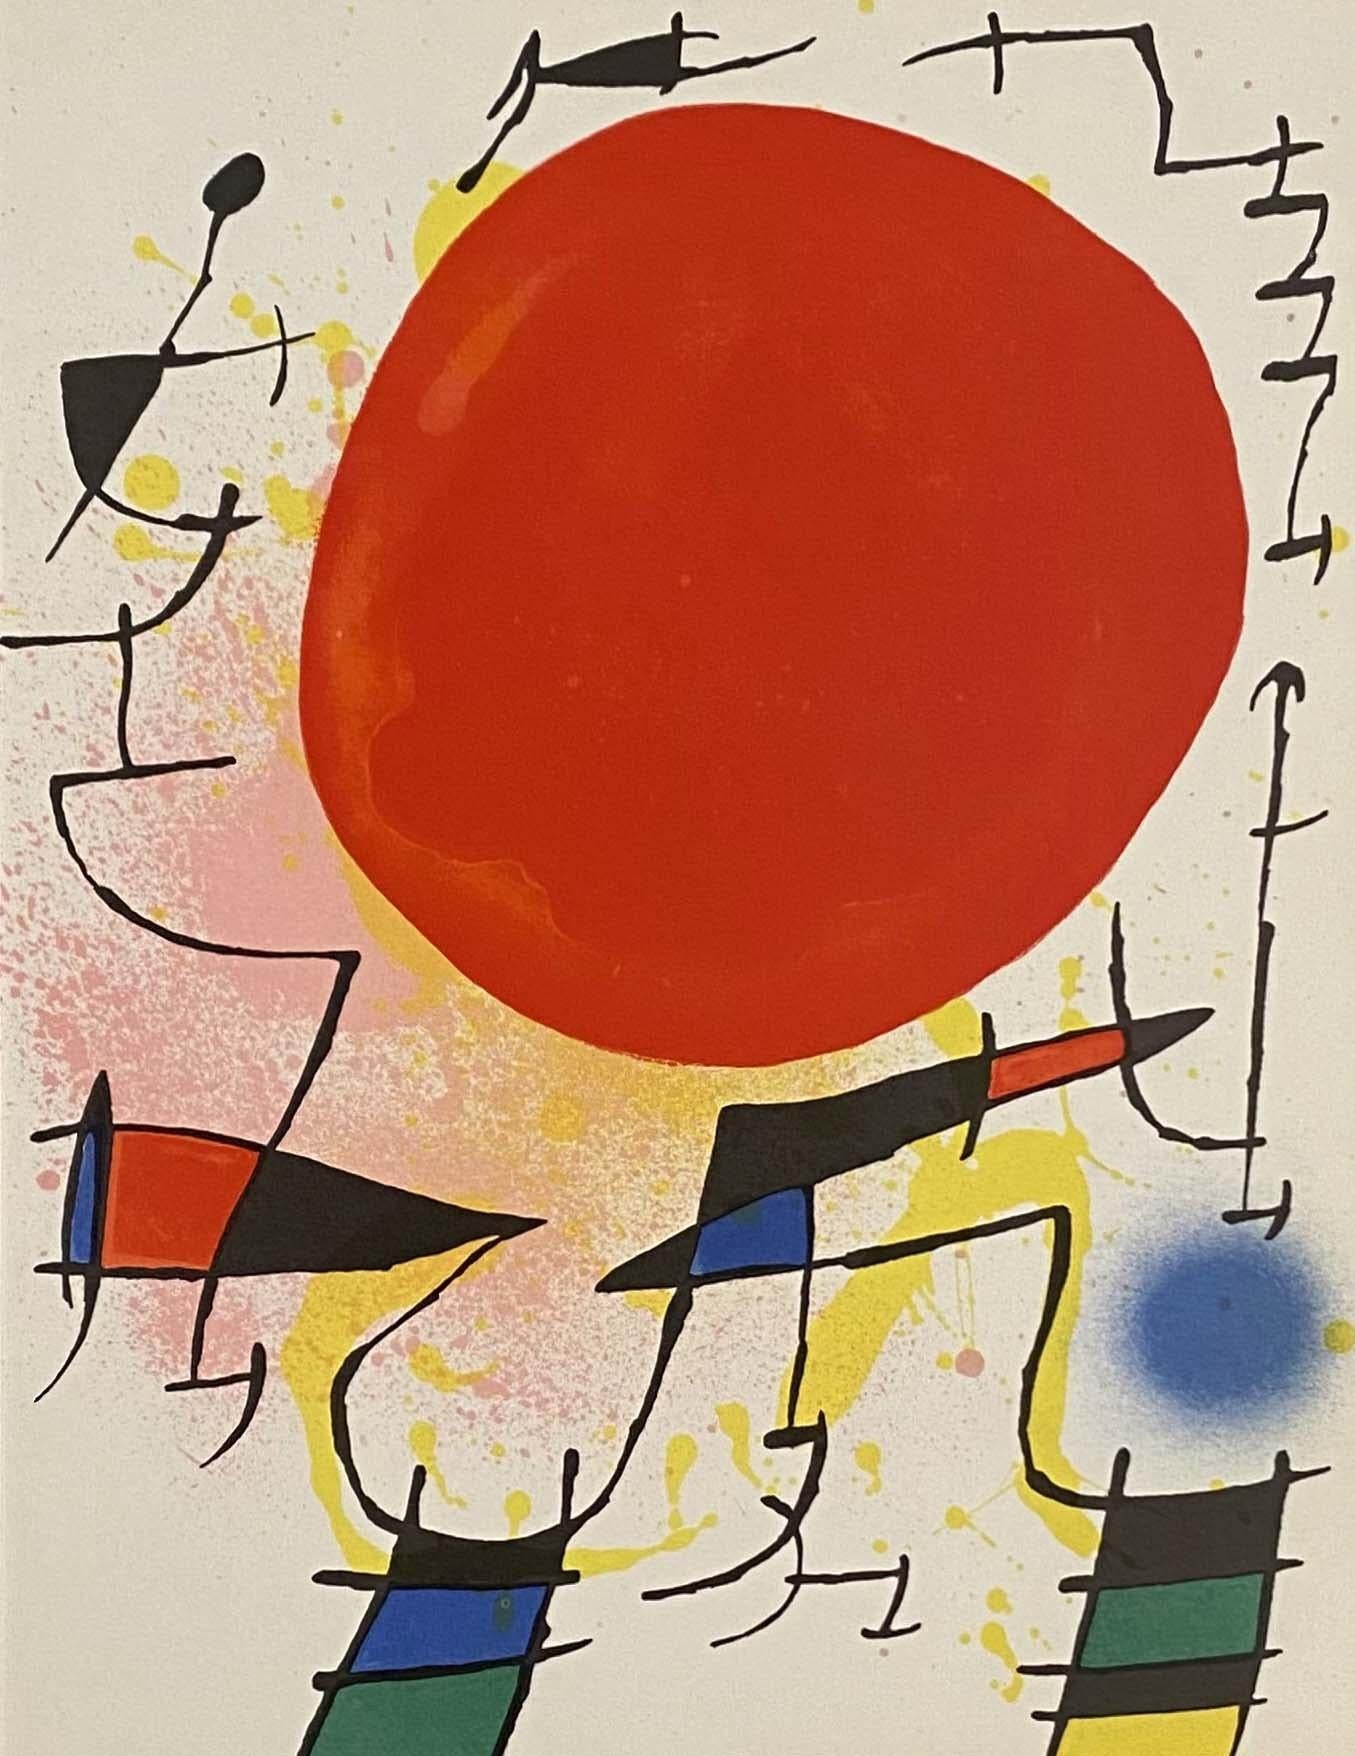 Joan Miró Abstract Print – Plate III, aus dem Jahr 1972, Lithographie I